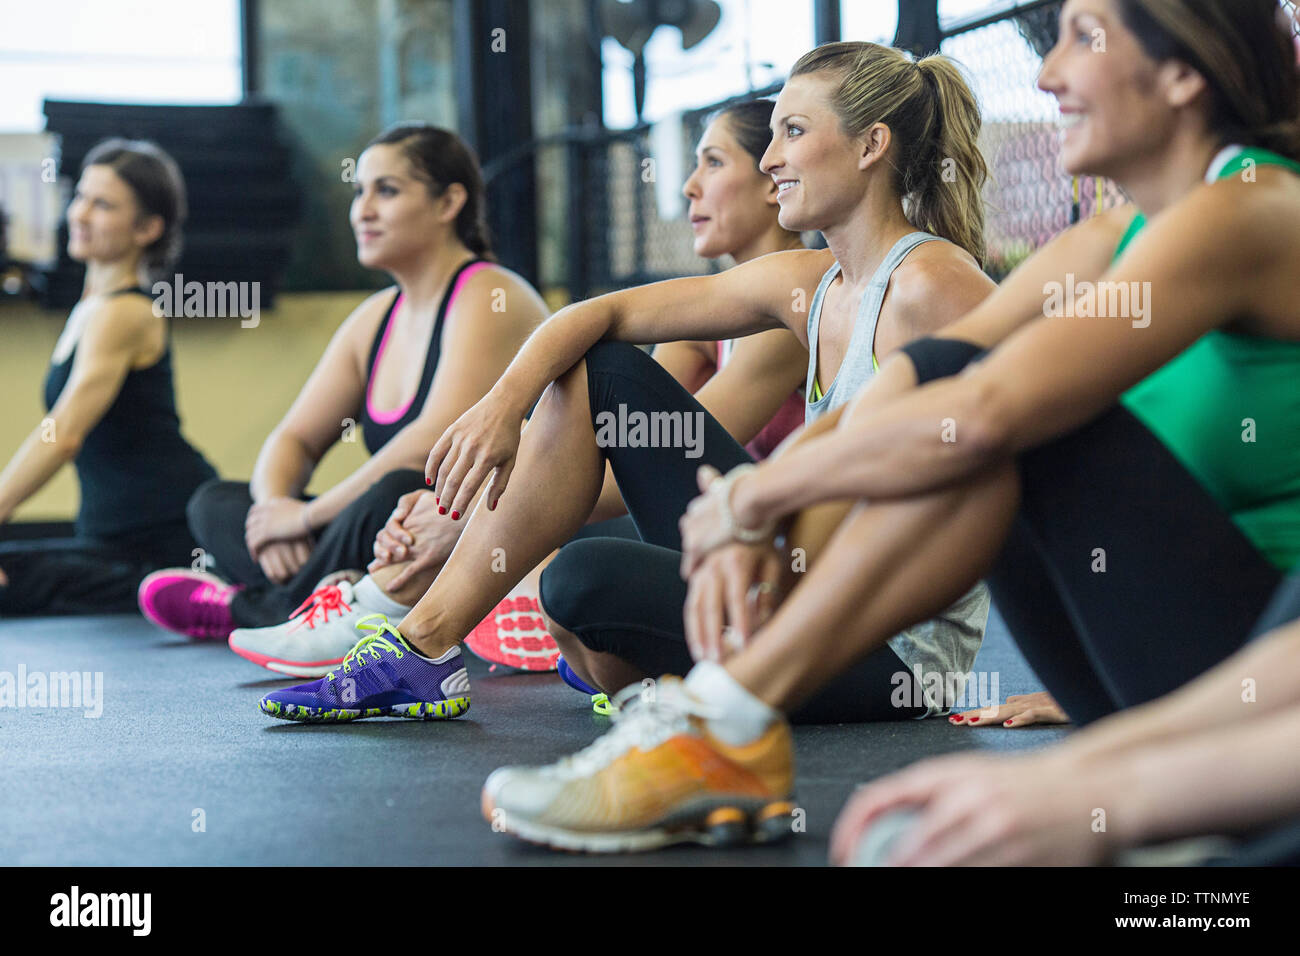 Tired women relaxing in gym Stock Photo